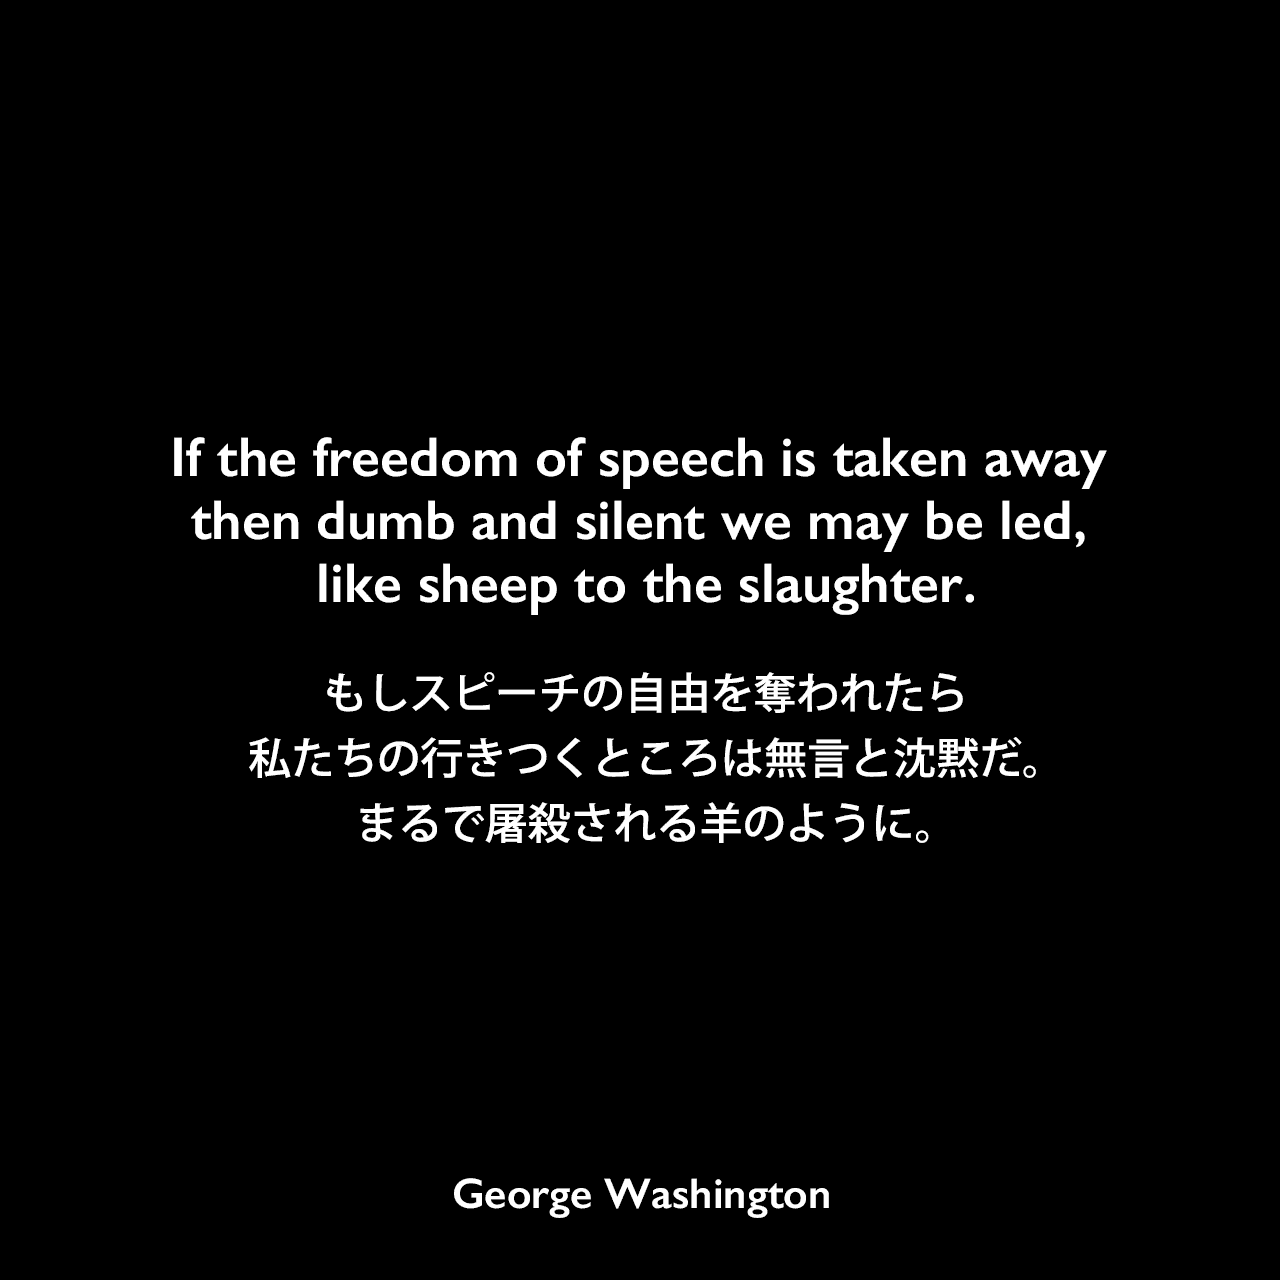 If the freedom of speech is taken away then dumb and silent we may be led, like sheep to the slaughter.もしスピーチの自由を奪われたら、私たちの行きつくところは無言と沈黙だ。まるで屠殺される羊のように。- 1783年のニューバーグ演説よりGeorge Washington